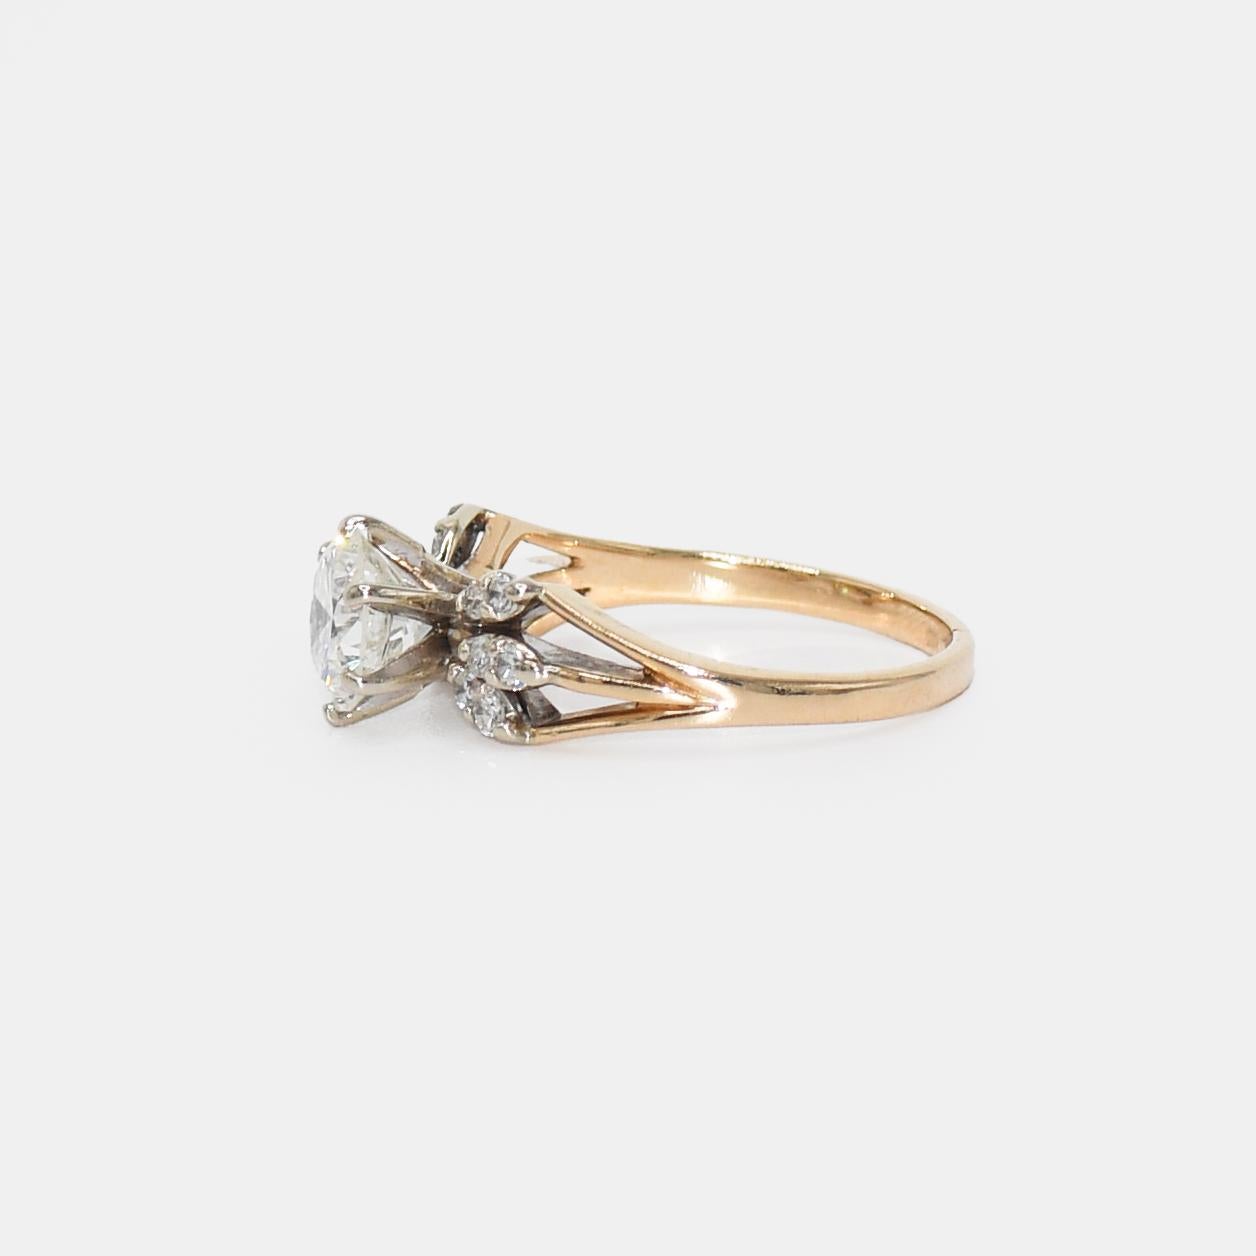 Women's or Men's 14k Yellow Gold Diamond Ring 1.25ct Round Brilliant For Sale